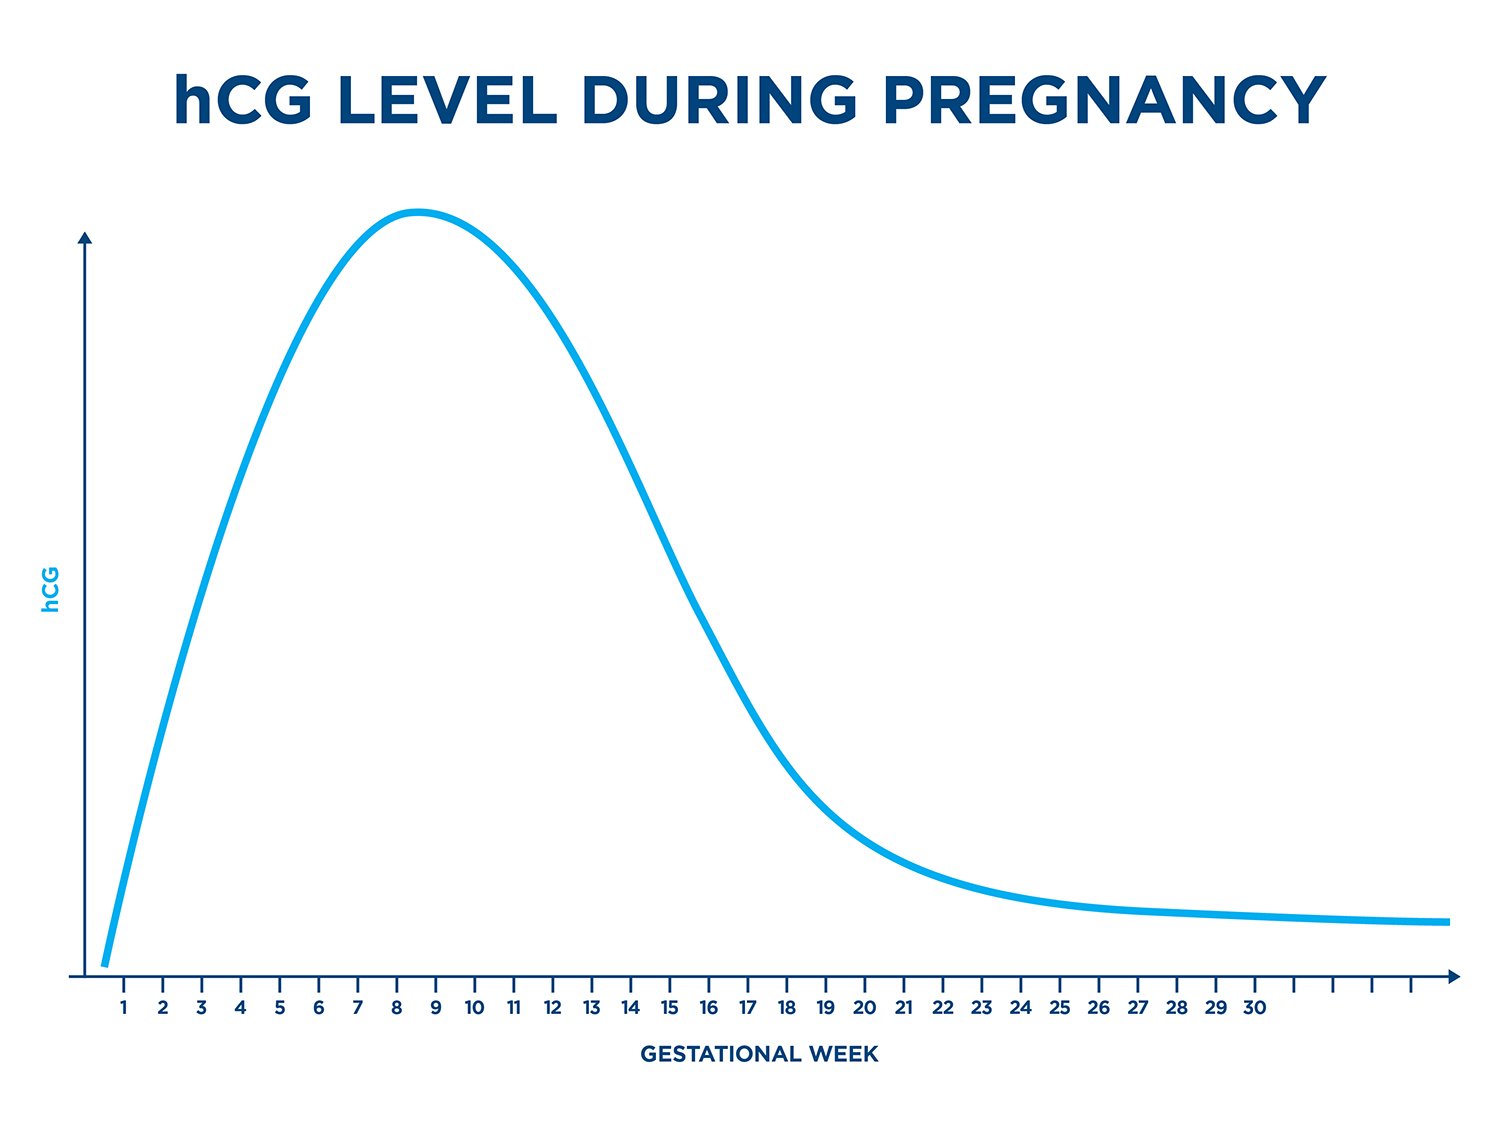 A graph showing hCG levels during pregnancy with the gestational weeks on the x axis and hCG levels on the y axis